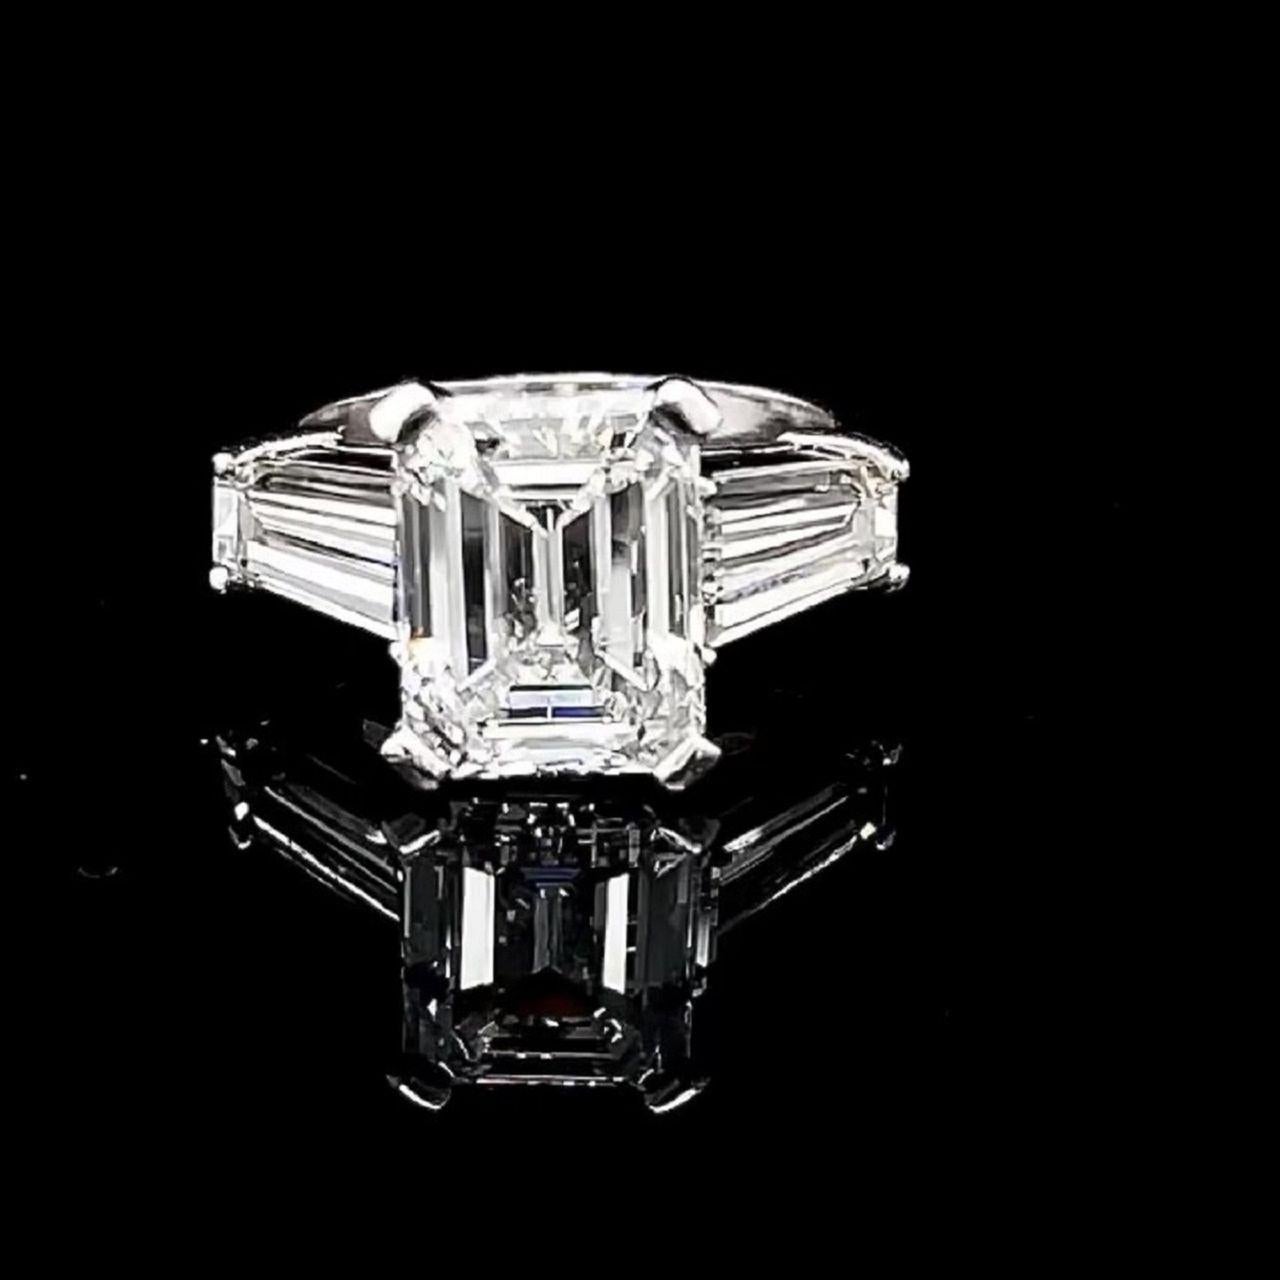 Diamond Emerald Cut Engagement Ring. 

Spectacular. 

Emerald Cut Diamond weighs 3.97 carats 

F Color VS1 Clarity  with GIA Certificate # 8473905

Tapered Baguette Diamond weighs 1.41 carats D Color VVS1 Clarity 

With GIA certificate #